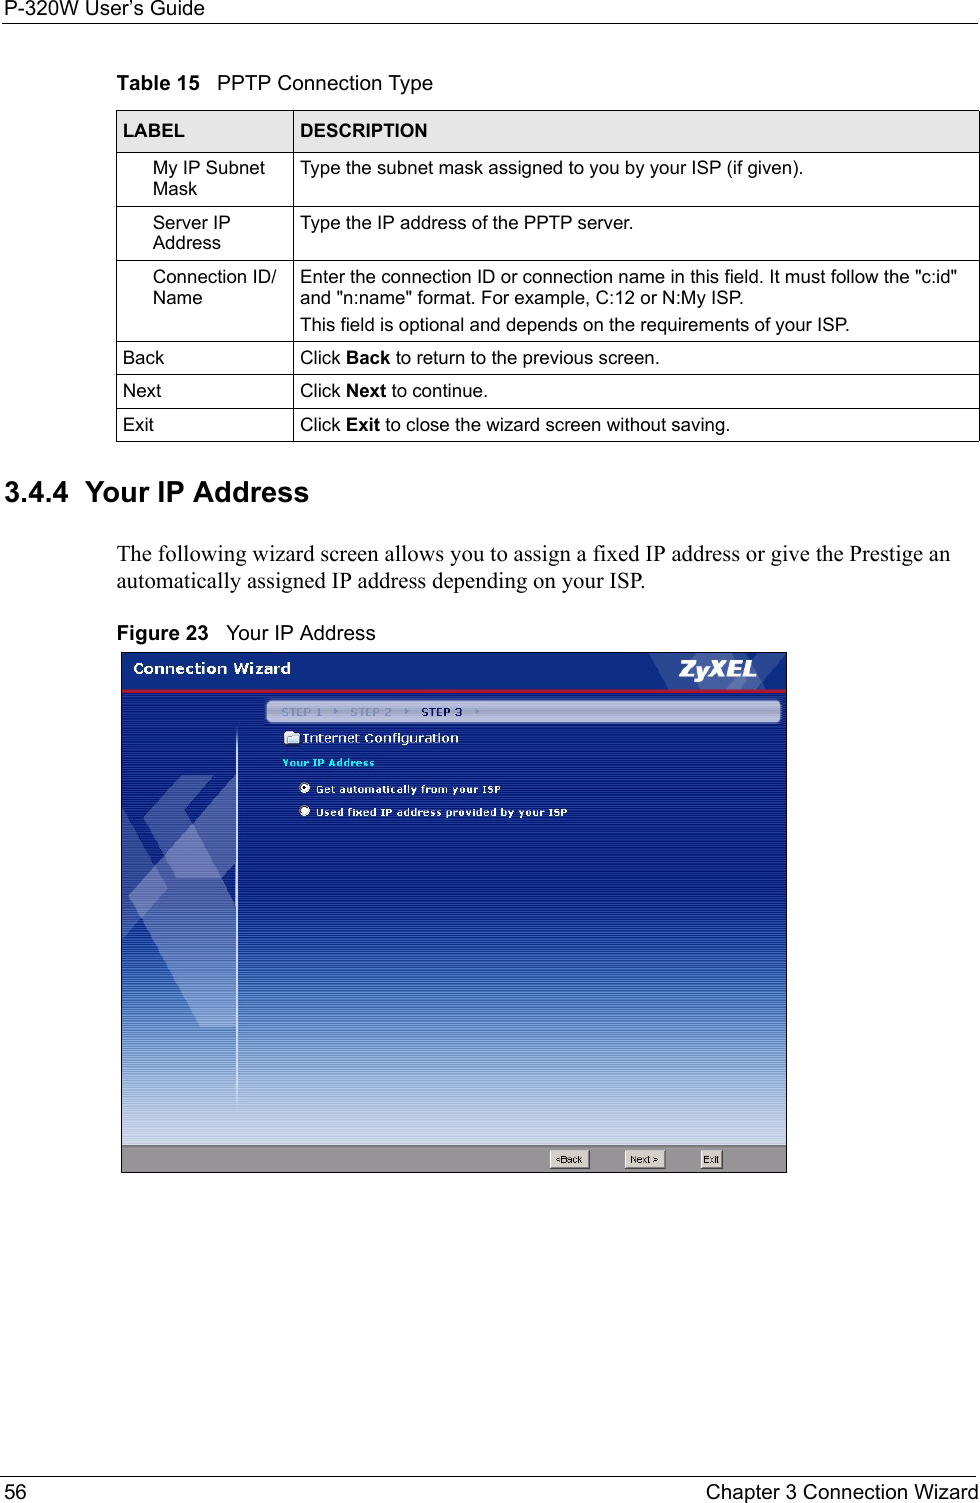 P-320W User’s Guide56  Chapter 3 Connection Wizard3.4.4  Your IP AddressThe following wizard screen allows you to assign a fixed IP address or give the Prestige an automatically assigned IP address depending on your ISP.Figure 23   Your IP AddressMy IP Subnet MaskType the subnet mask assigned to you by your ISP (if given).Server IP AddressType the IP address of the PPTP server.Connection ID/NameEnter the connection ID or connection name in this field. It must follow the &quot;c:id&quot; and &quot;n:name&quot; format. For example, C:12 or N:My ISP.This field is optional and depends on the requirements of your ISP.Back Click Back to return to the previous screen.Next Click Next to continue. Exit Click Exit to close the wizard screen without saving.Table 15   PPTP Connection TypeLABEL DESCRIPTION